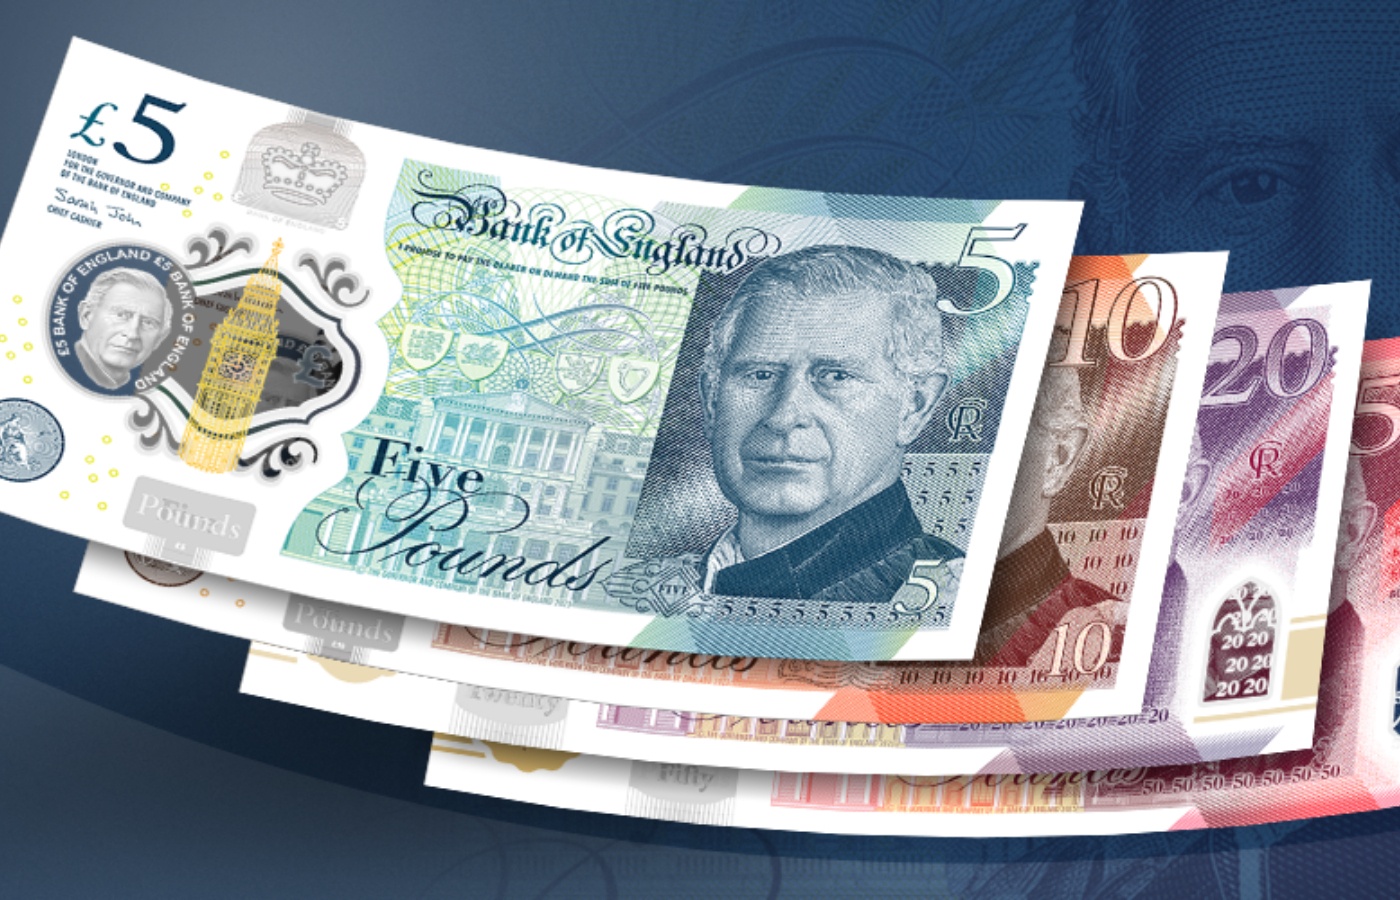 The notes were introduced on Wednesday, June 5 on £5, £10, £20 and £50.